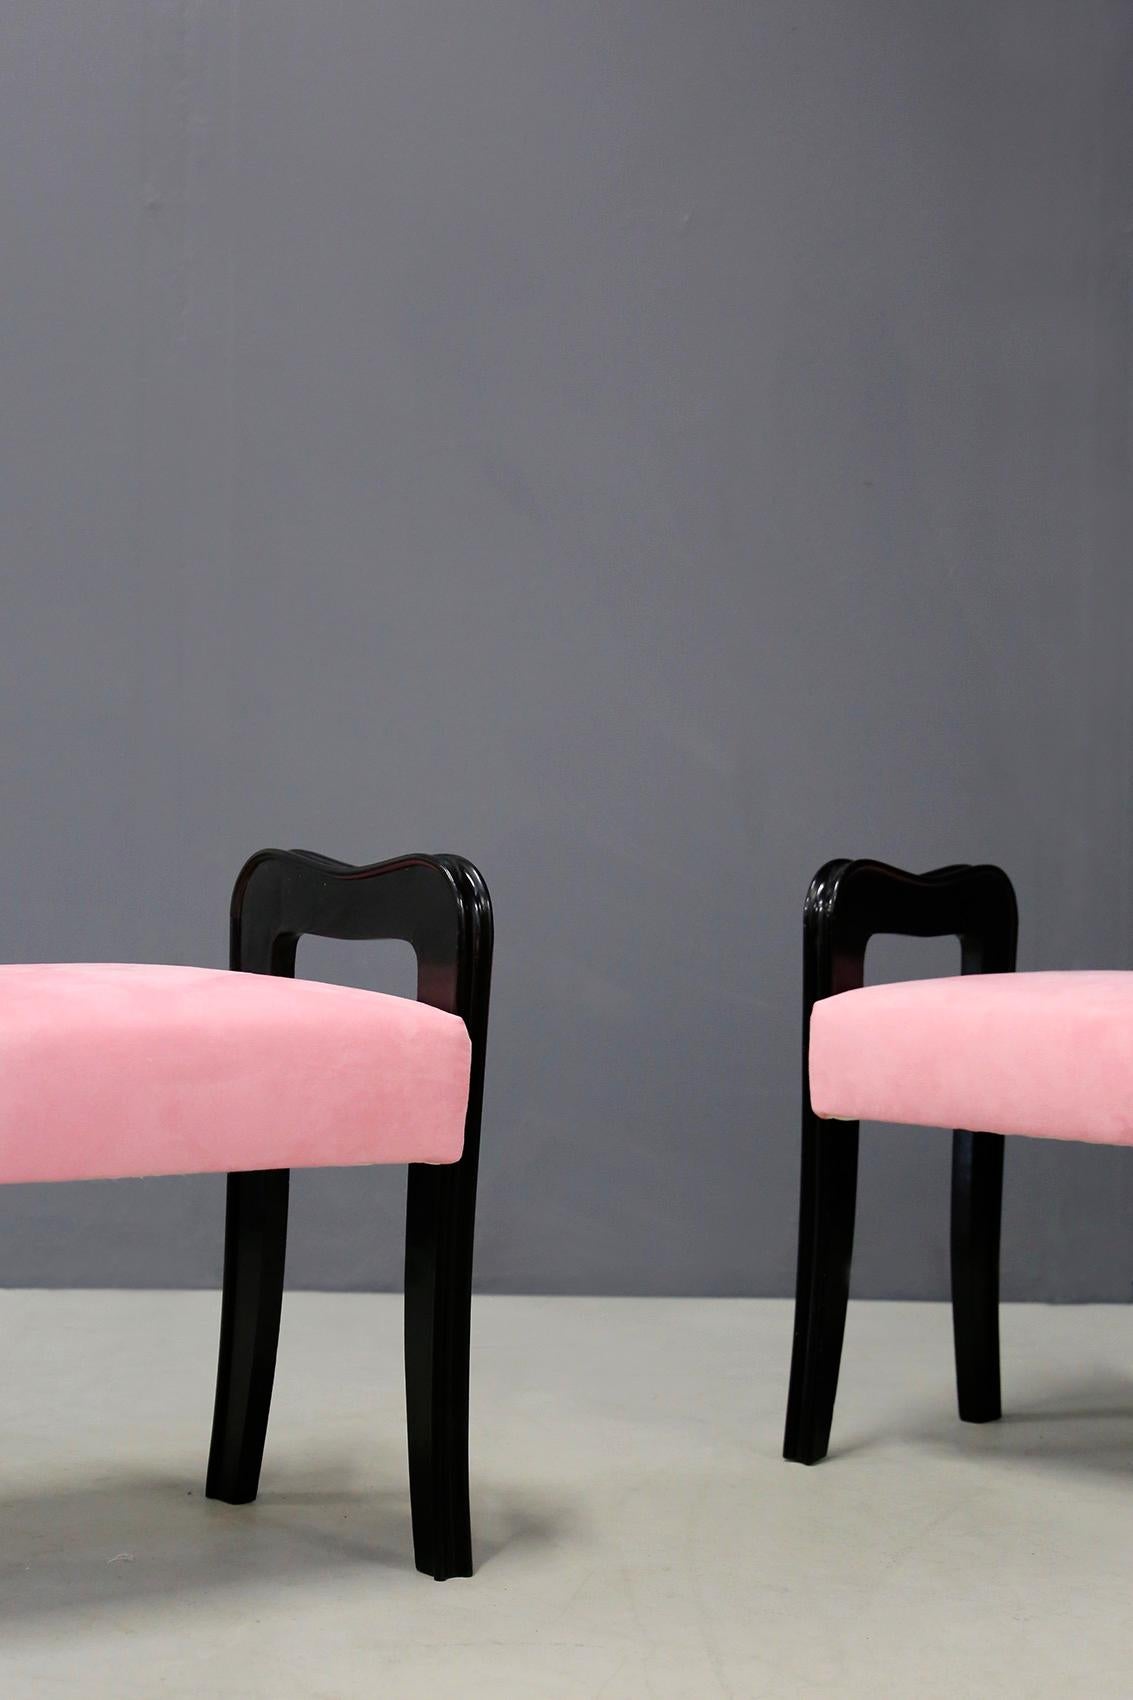 Pair of Italian stools attributed to designer Paolo Buffa from circa 1950. The stools have been restored and lined in pink velvet. The pair is made of ebonized wood and has slight defects due to age and use. The peculiarity of the product are its